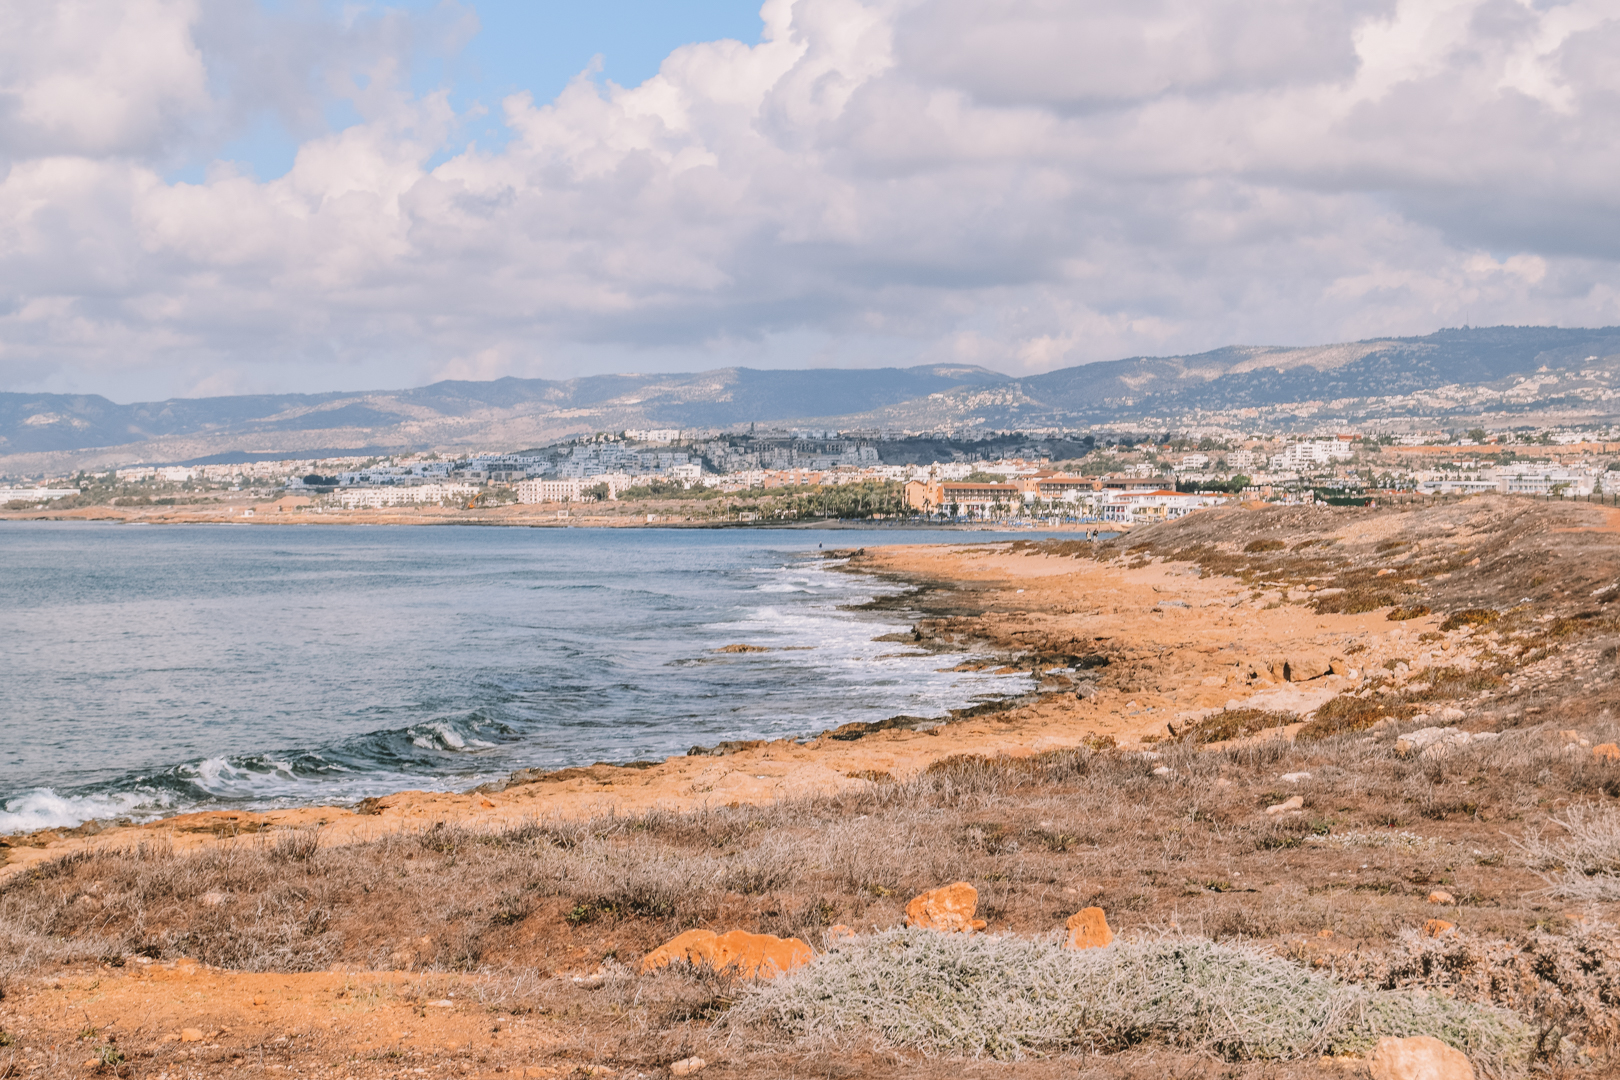 A Guide To The 6 Best Beaches In Paphos, Cyprus